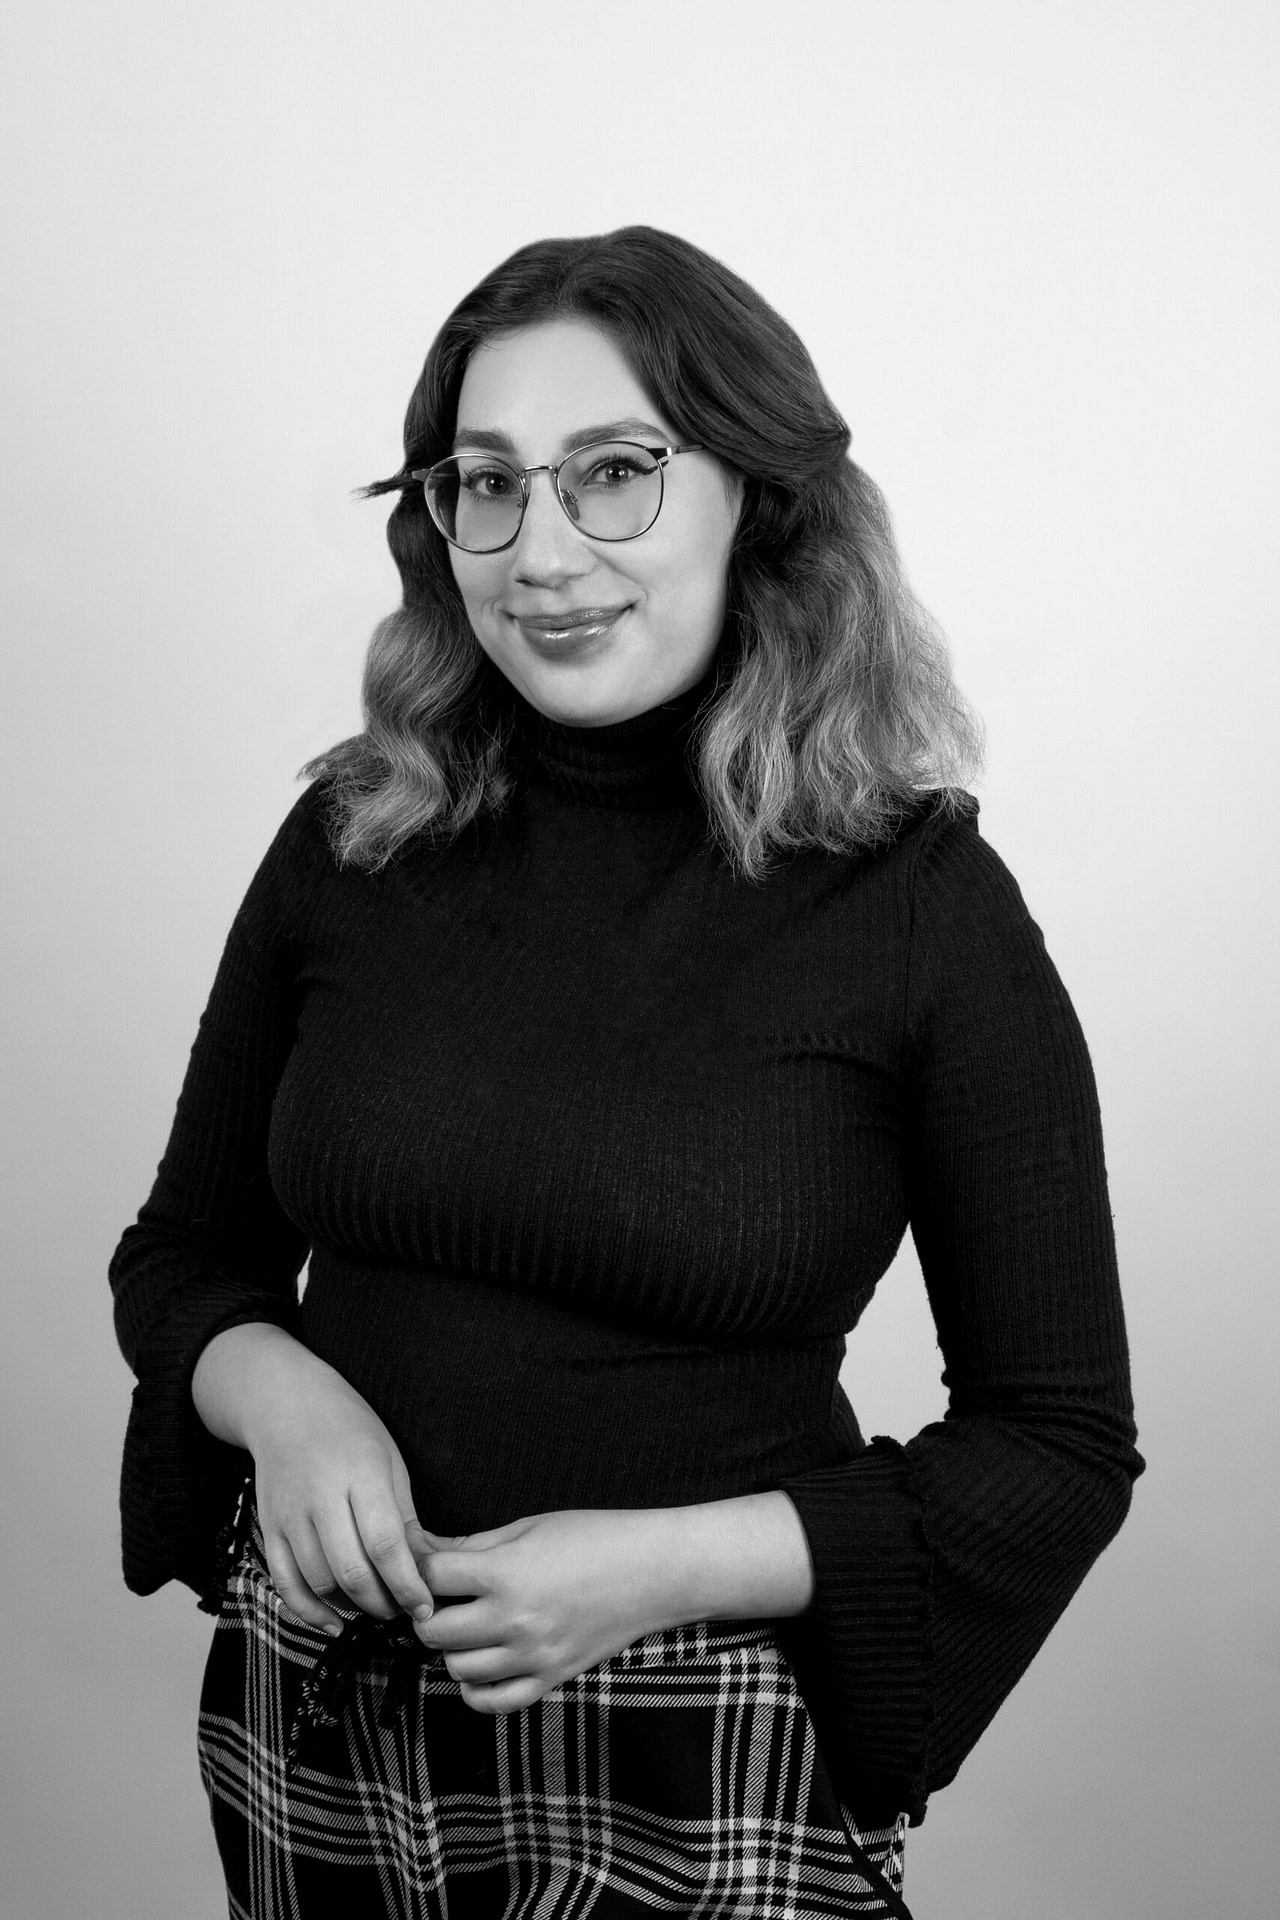 Meet our new Senior Project Manager, Injy Oundijan